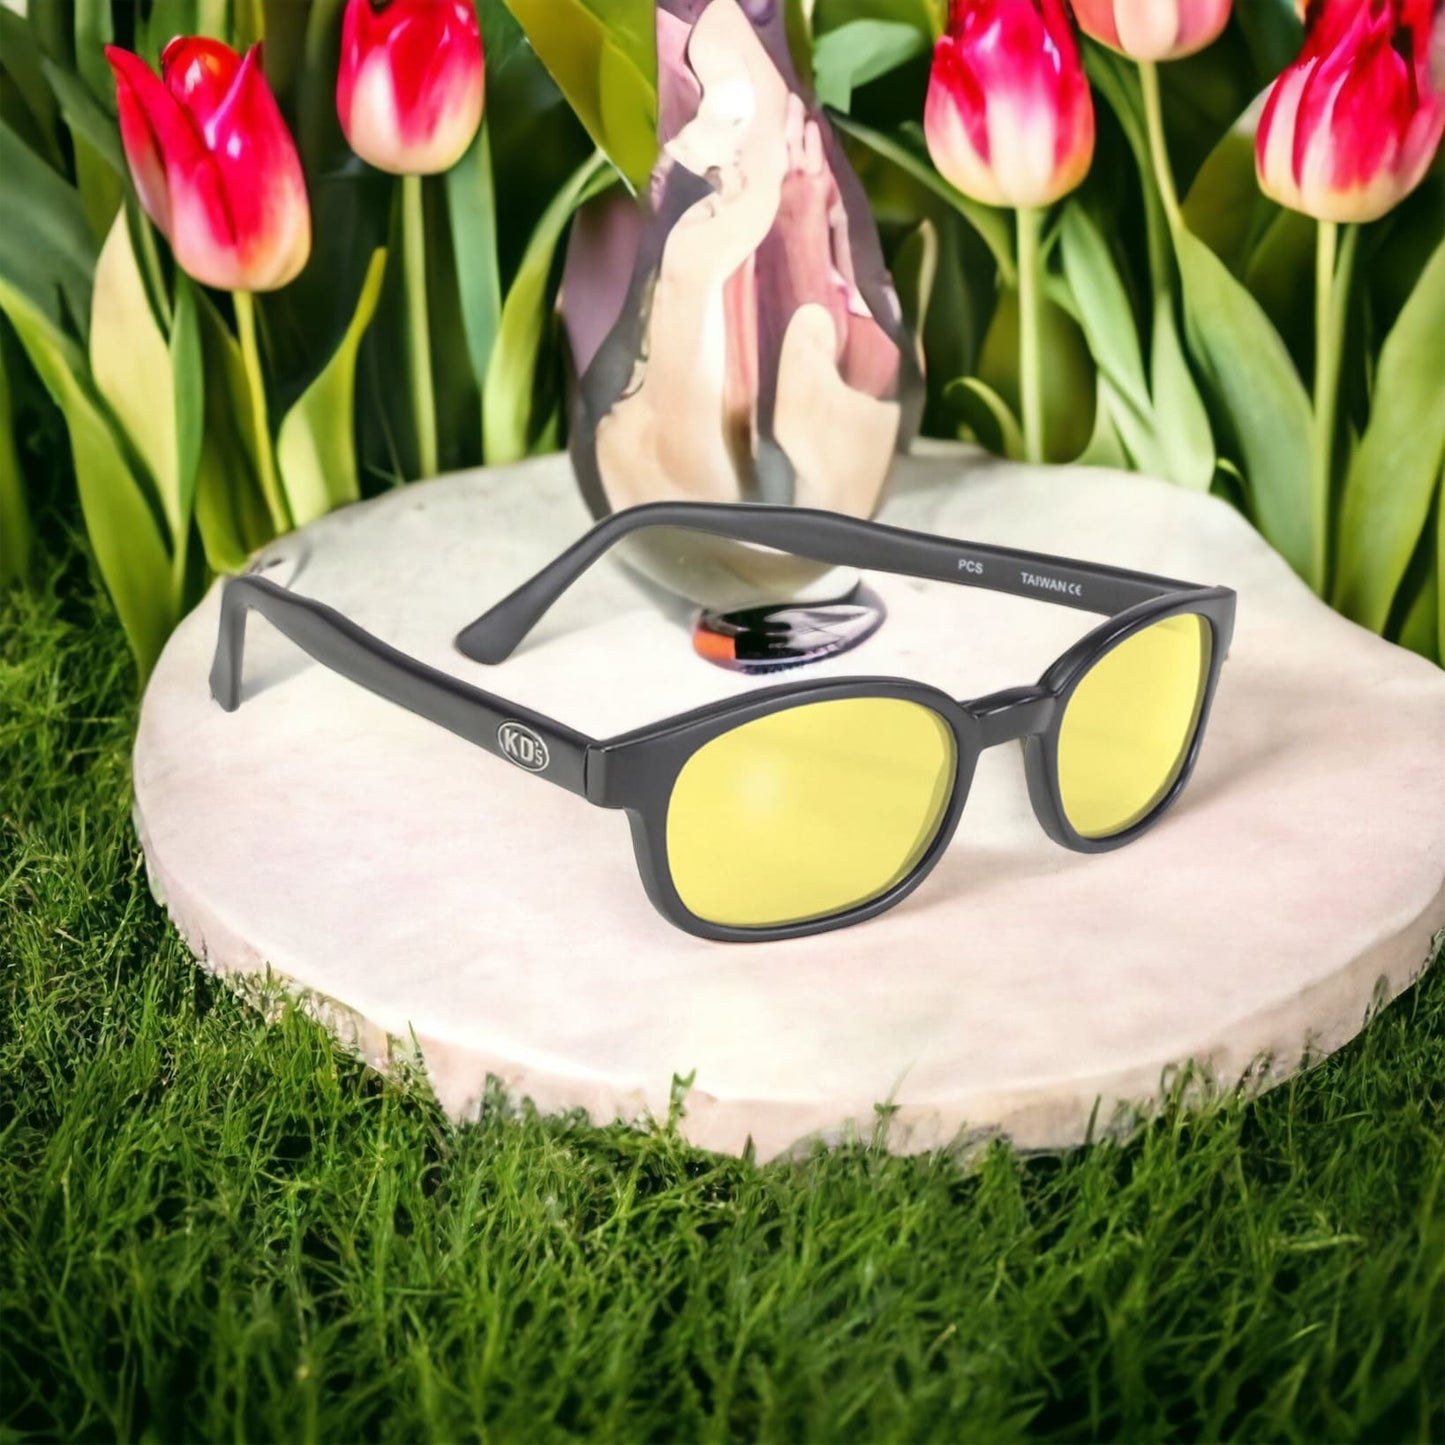 X-KD's 11112 large sunglasses for bikers with a sleek, solid black frame and yellow polycarbonate lenses set in front of tulips.